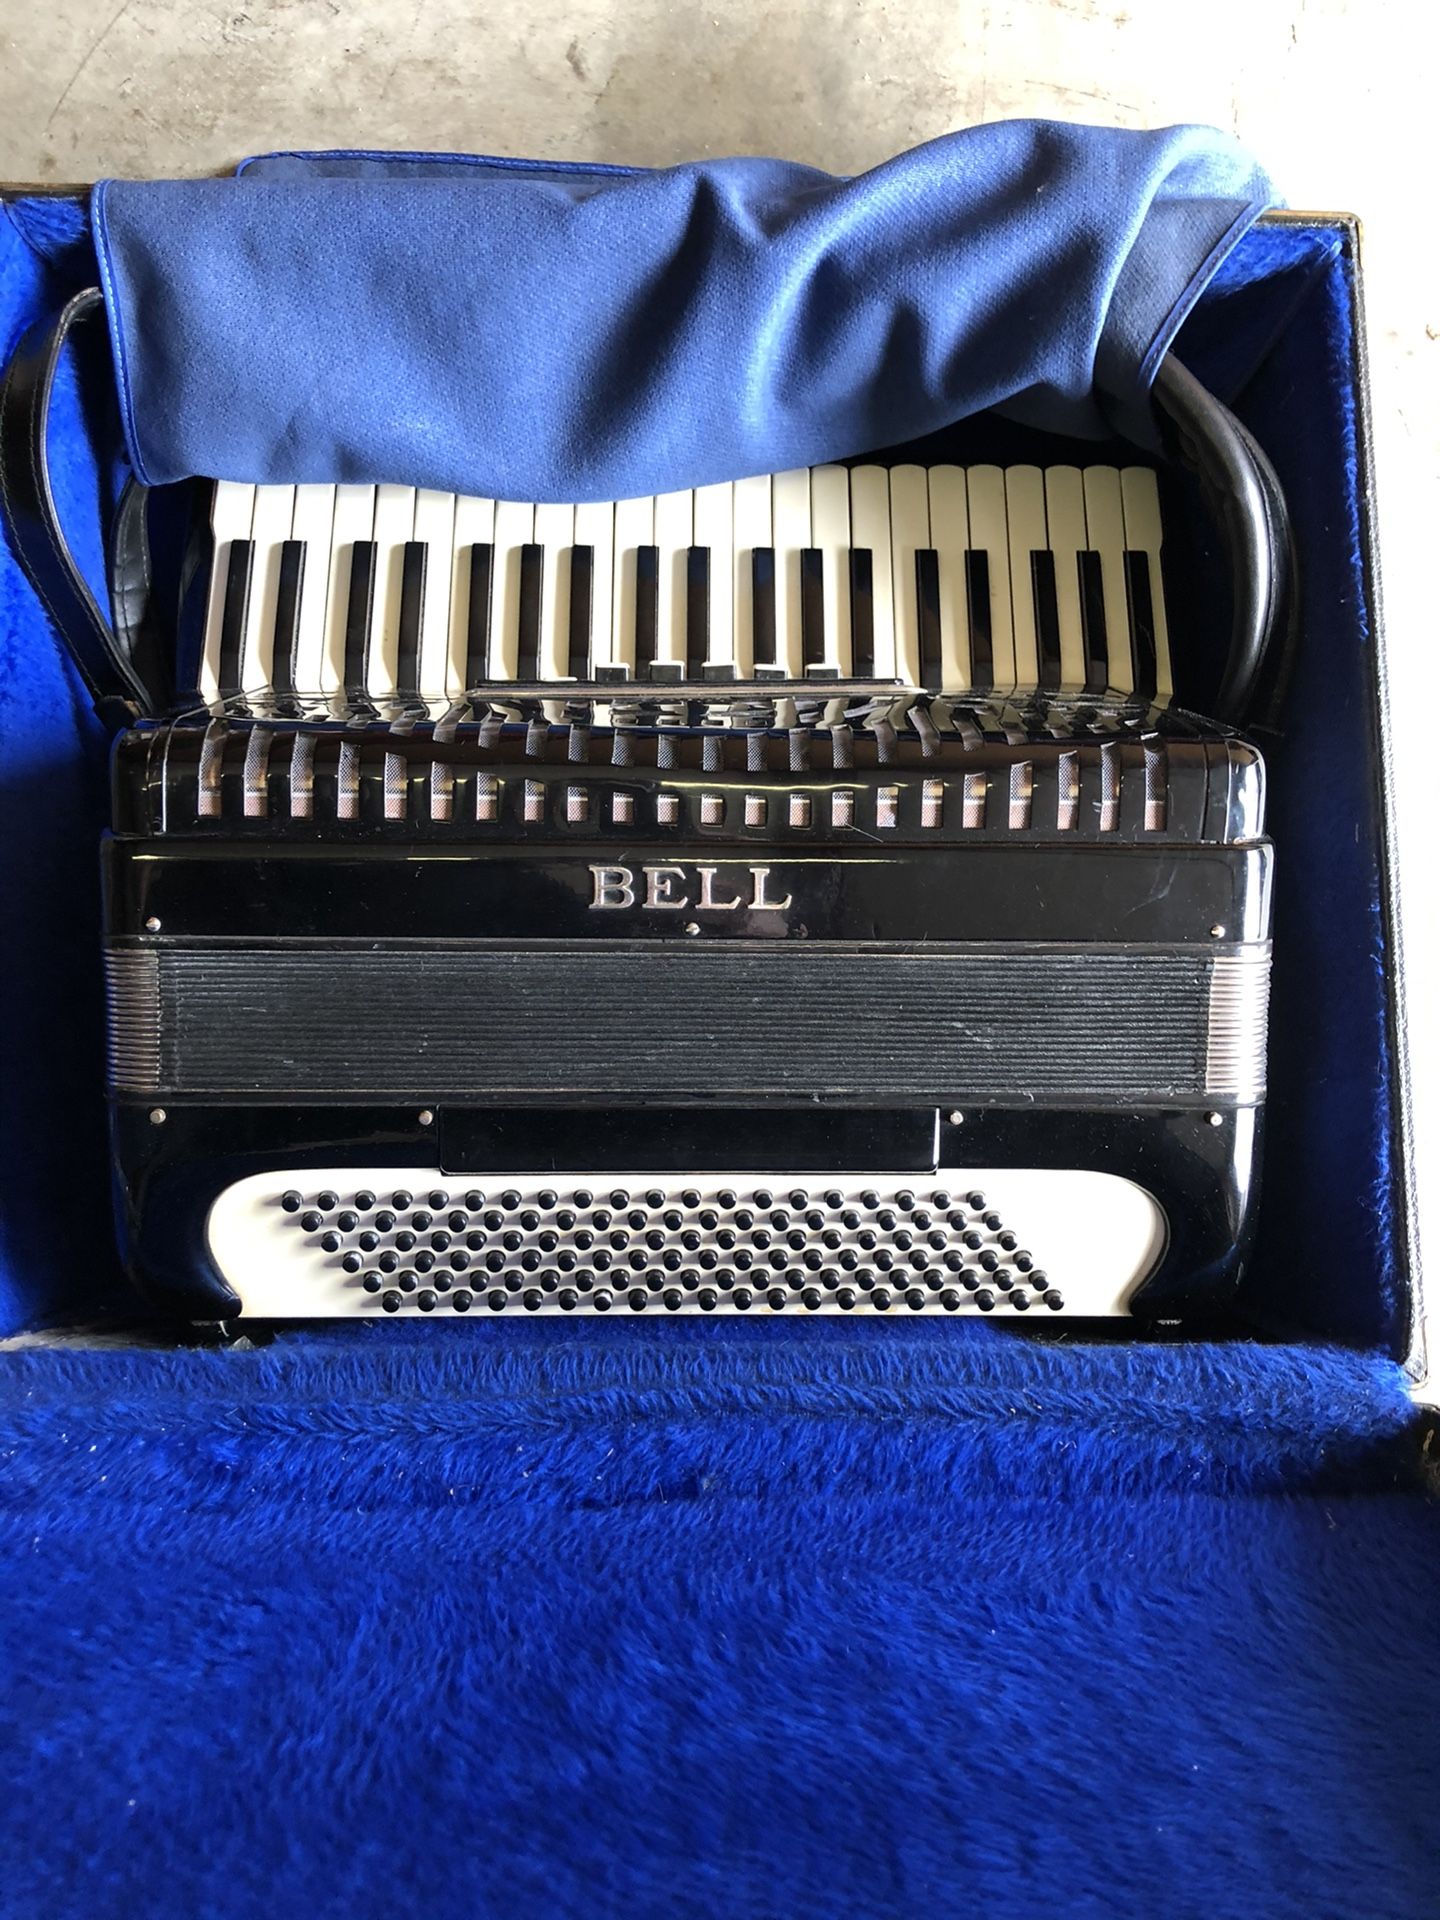 Bell Accordion In Very Good Condition Make Offer!!!